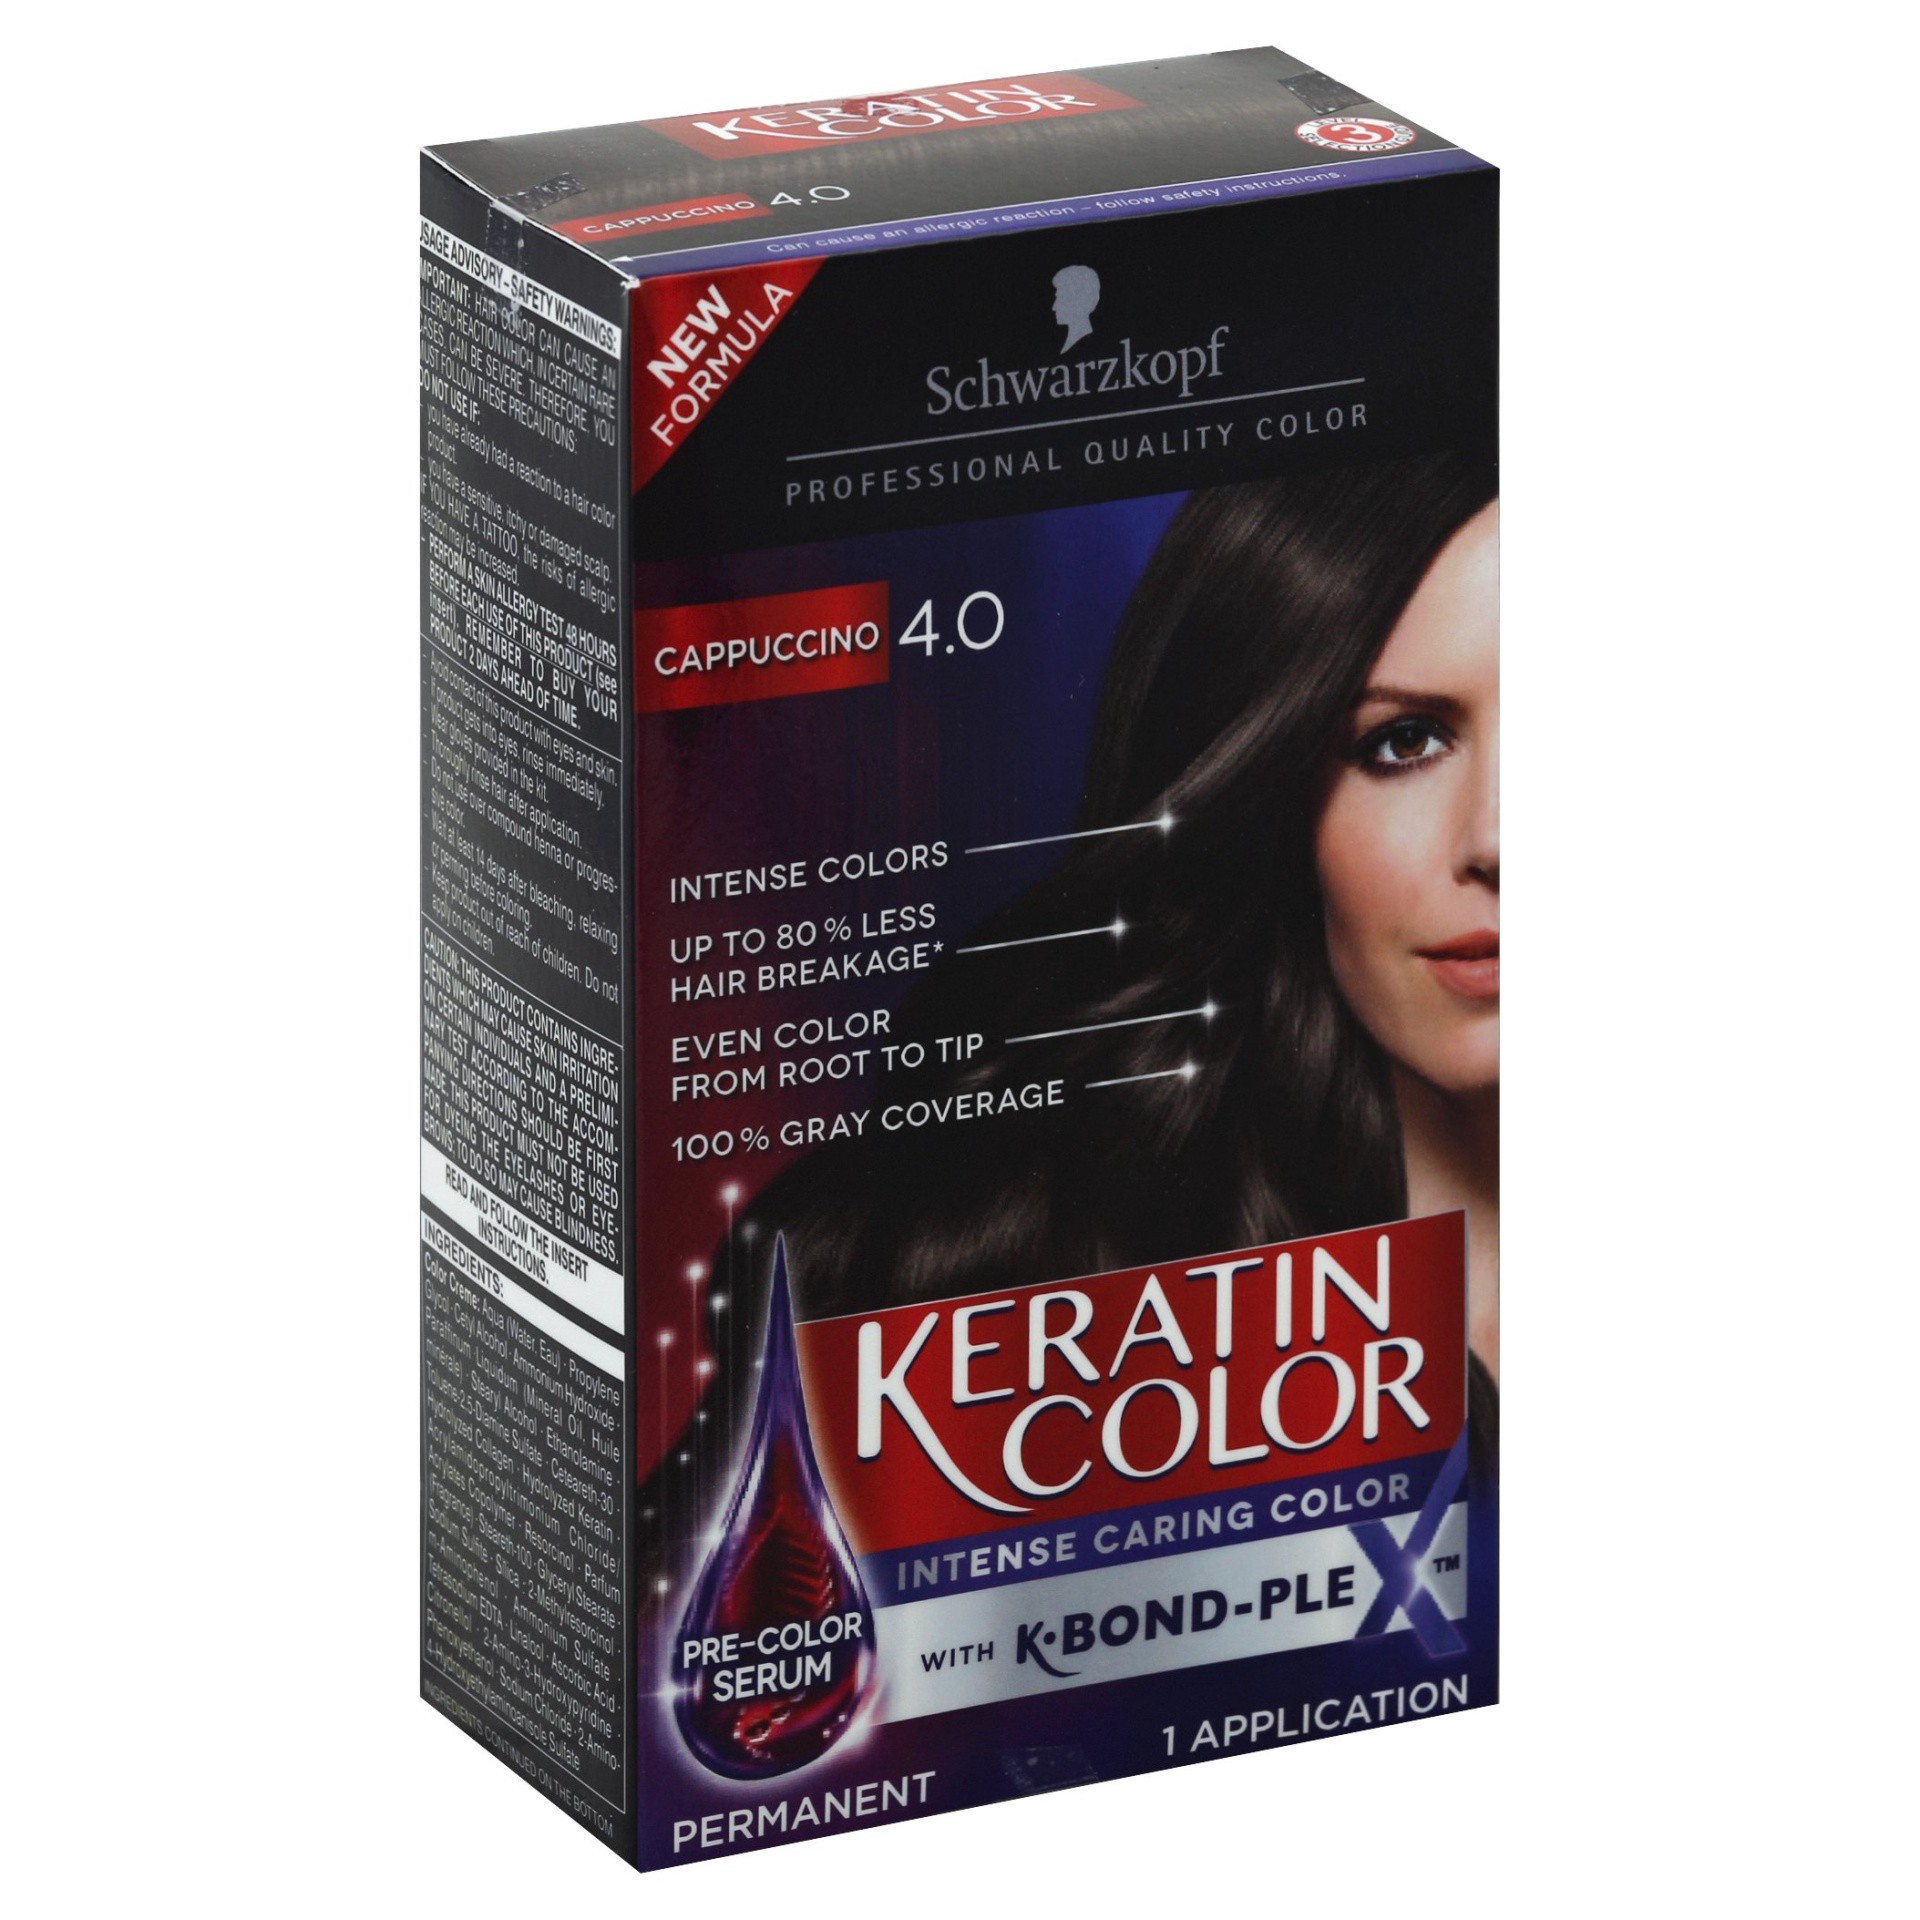 slide 1 of 7, Schwarzkopf Intense Caring Color 4.0 Cappuccino Hair Color Kit With K-Bond-Plex, 2.03 oz